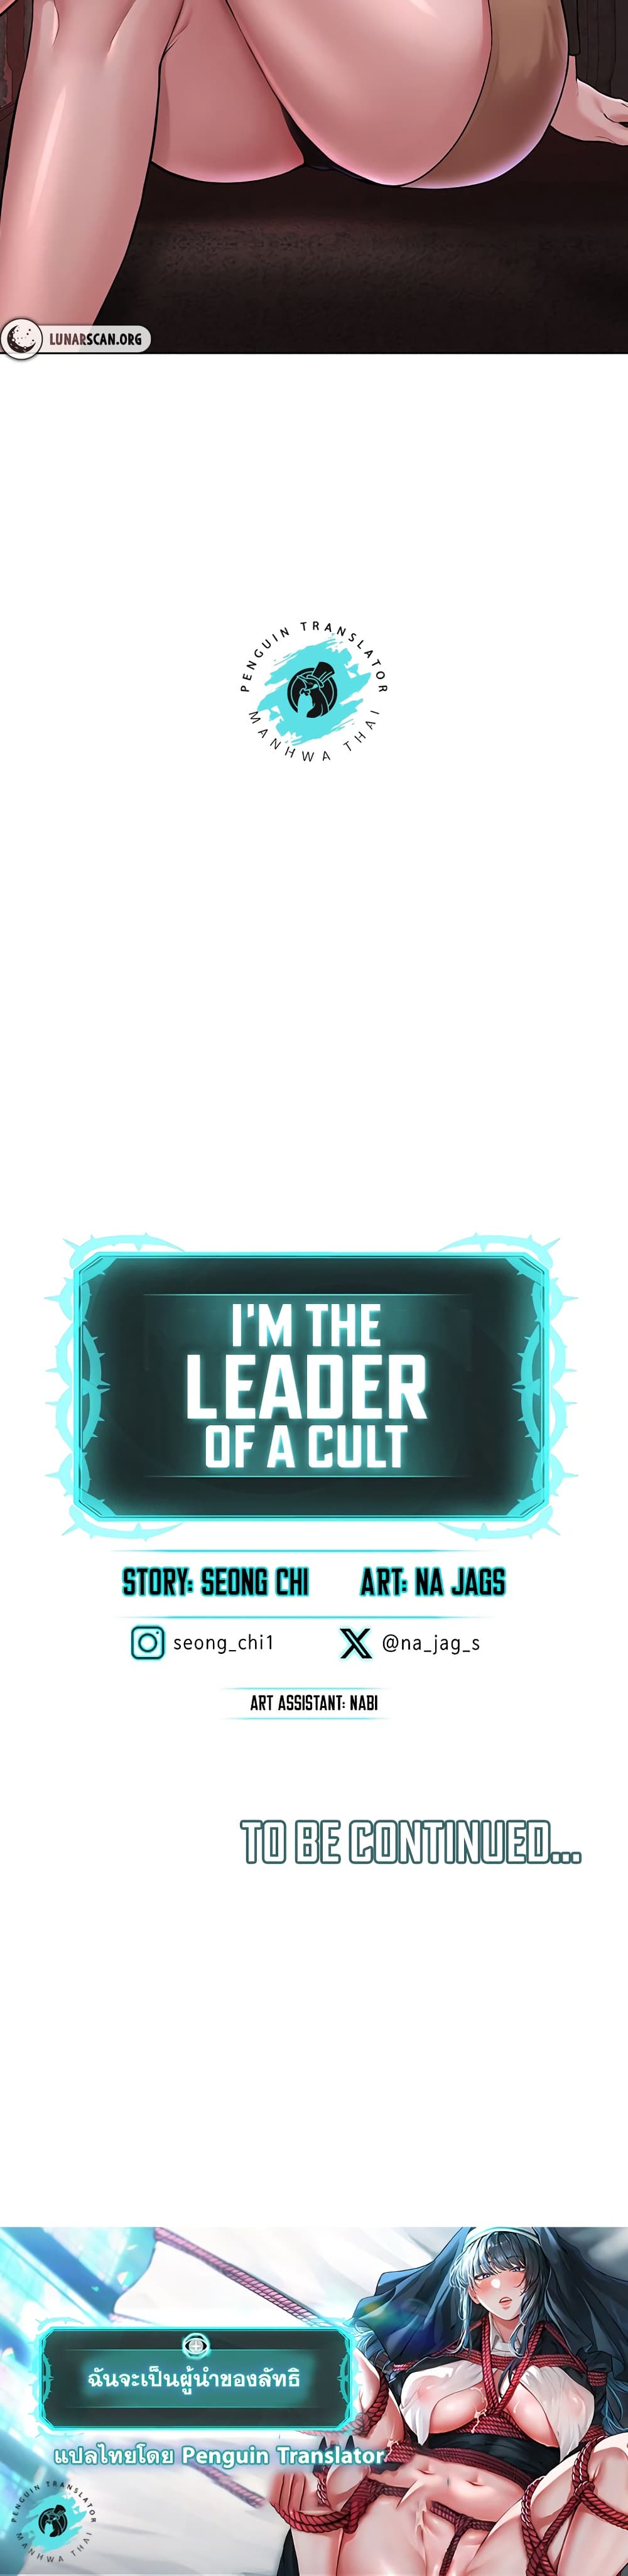 I’m The Leader Of A Cult 4-4